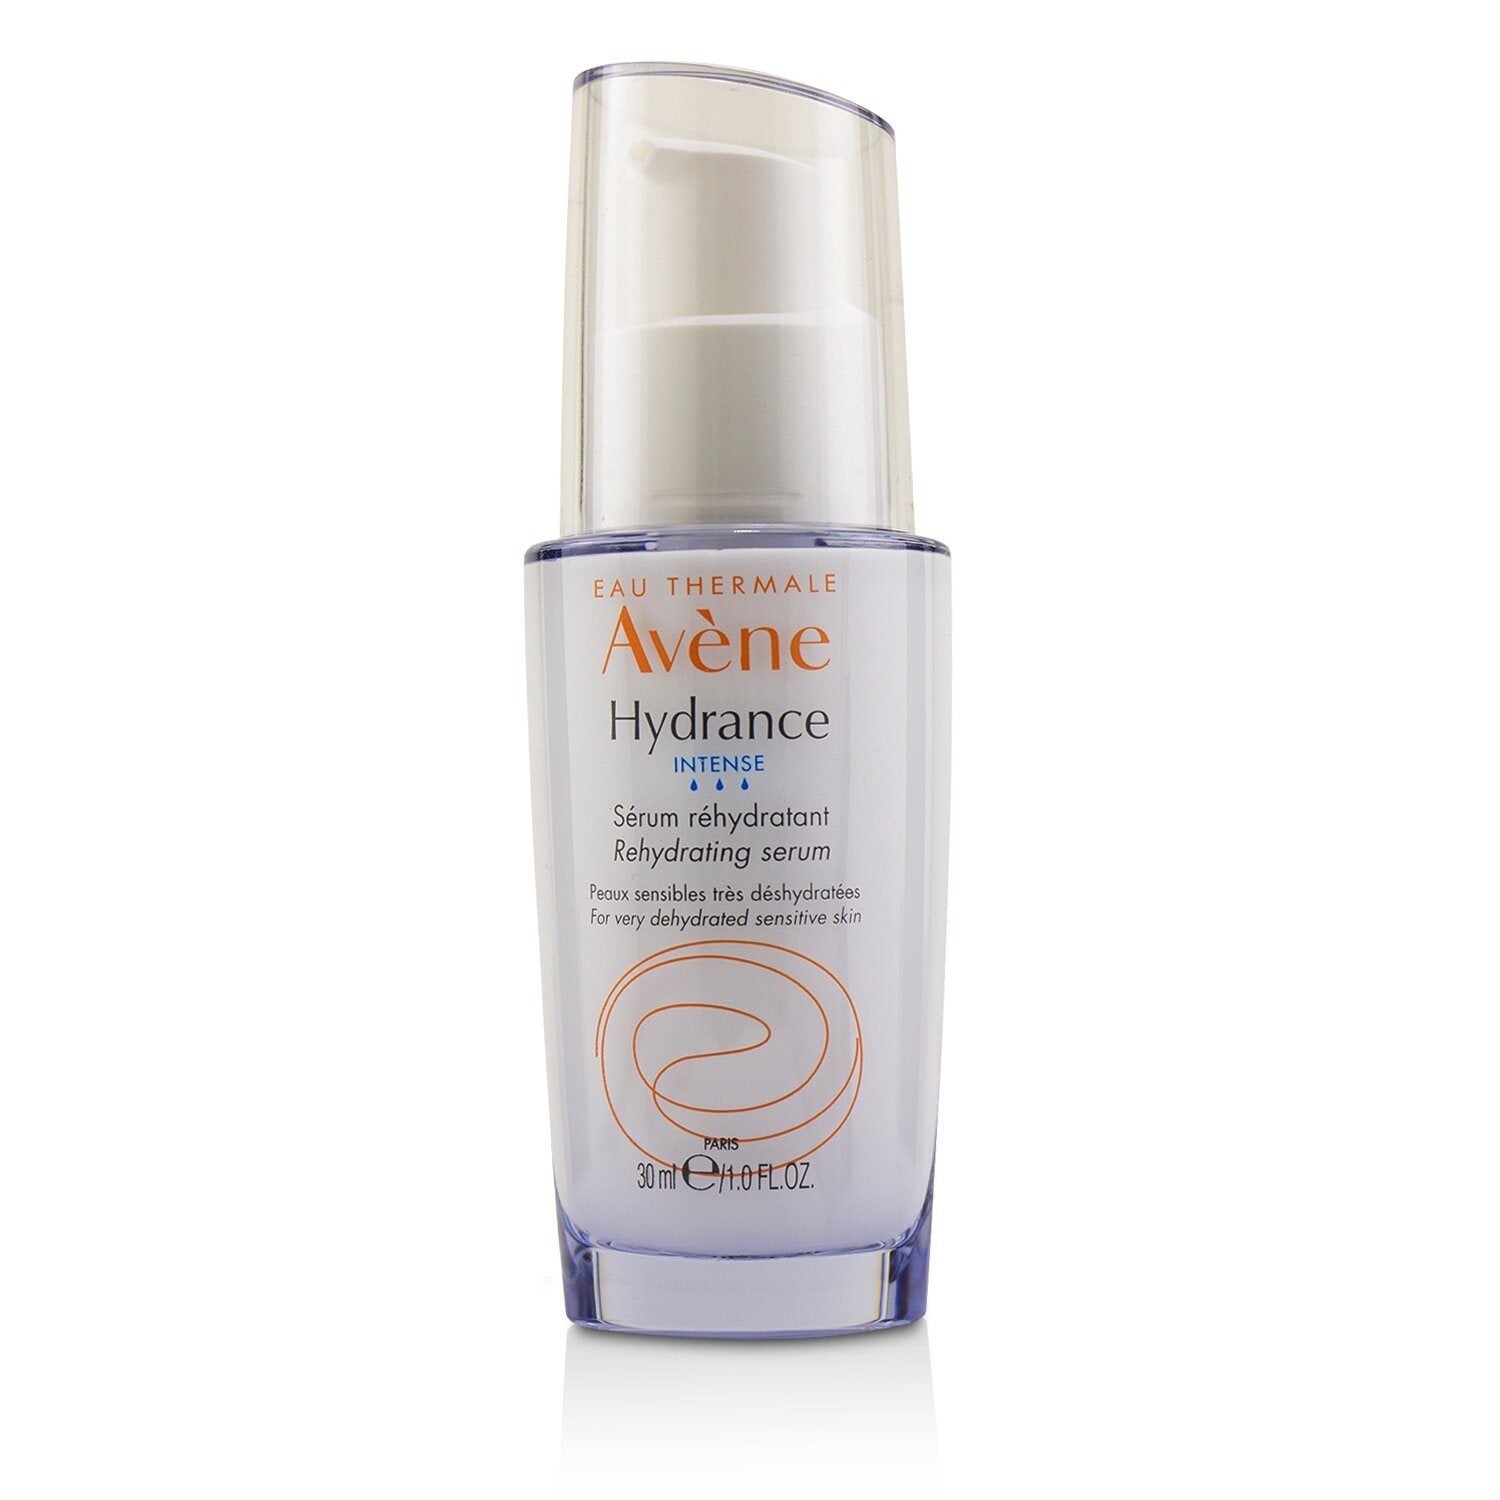 A bottle of Avene - Hydrance Intense Rehydrating Serum - For Very Dehydrated Sensitive Skin - 30ml/1oz against a white background.